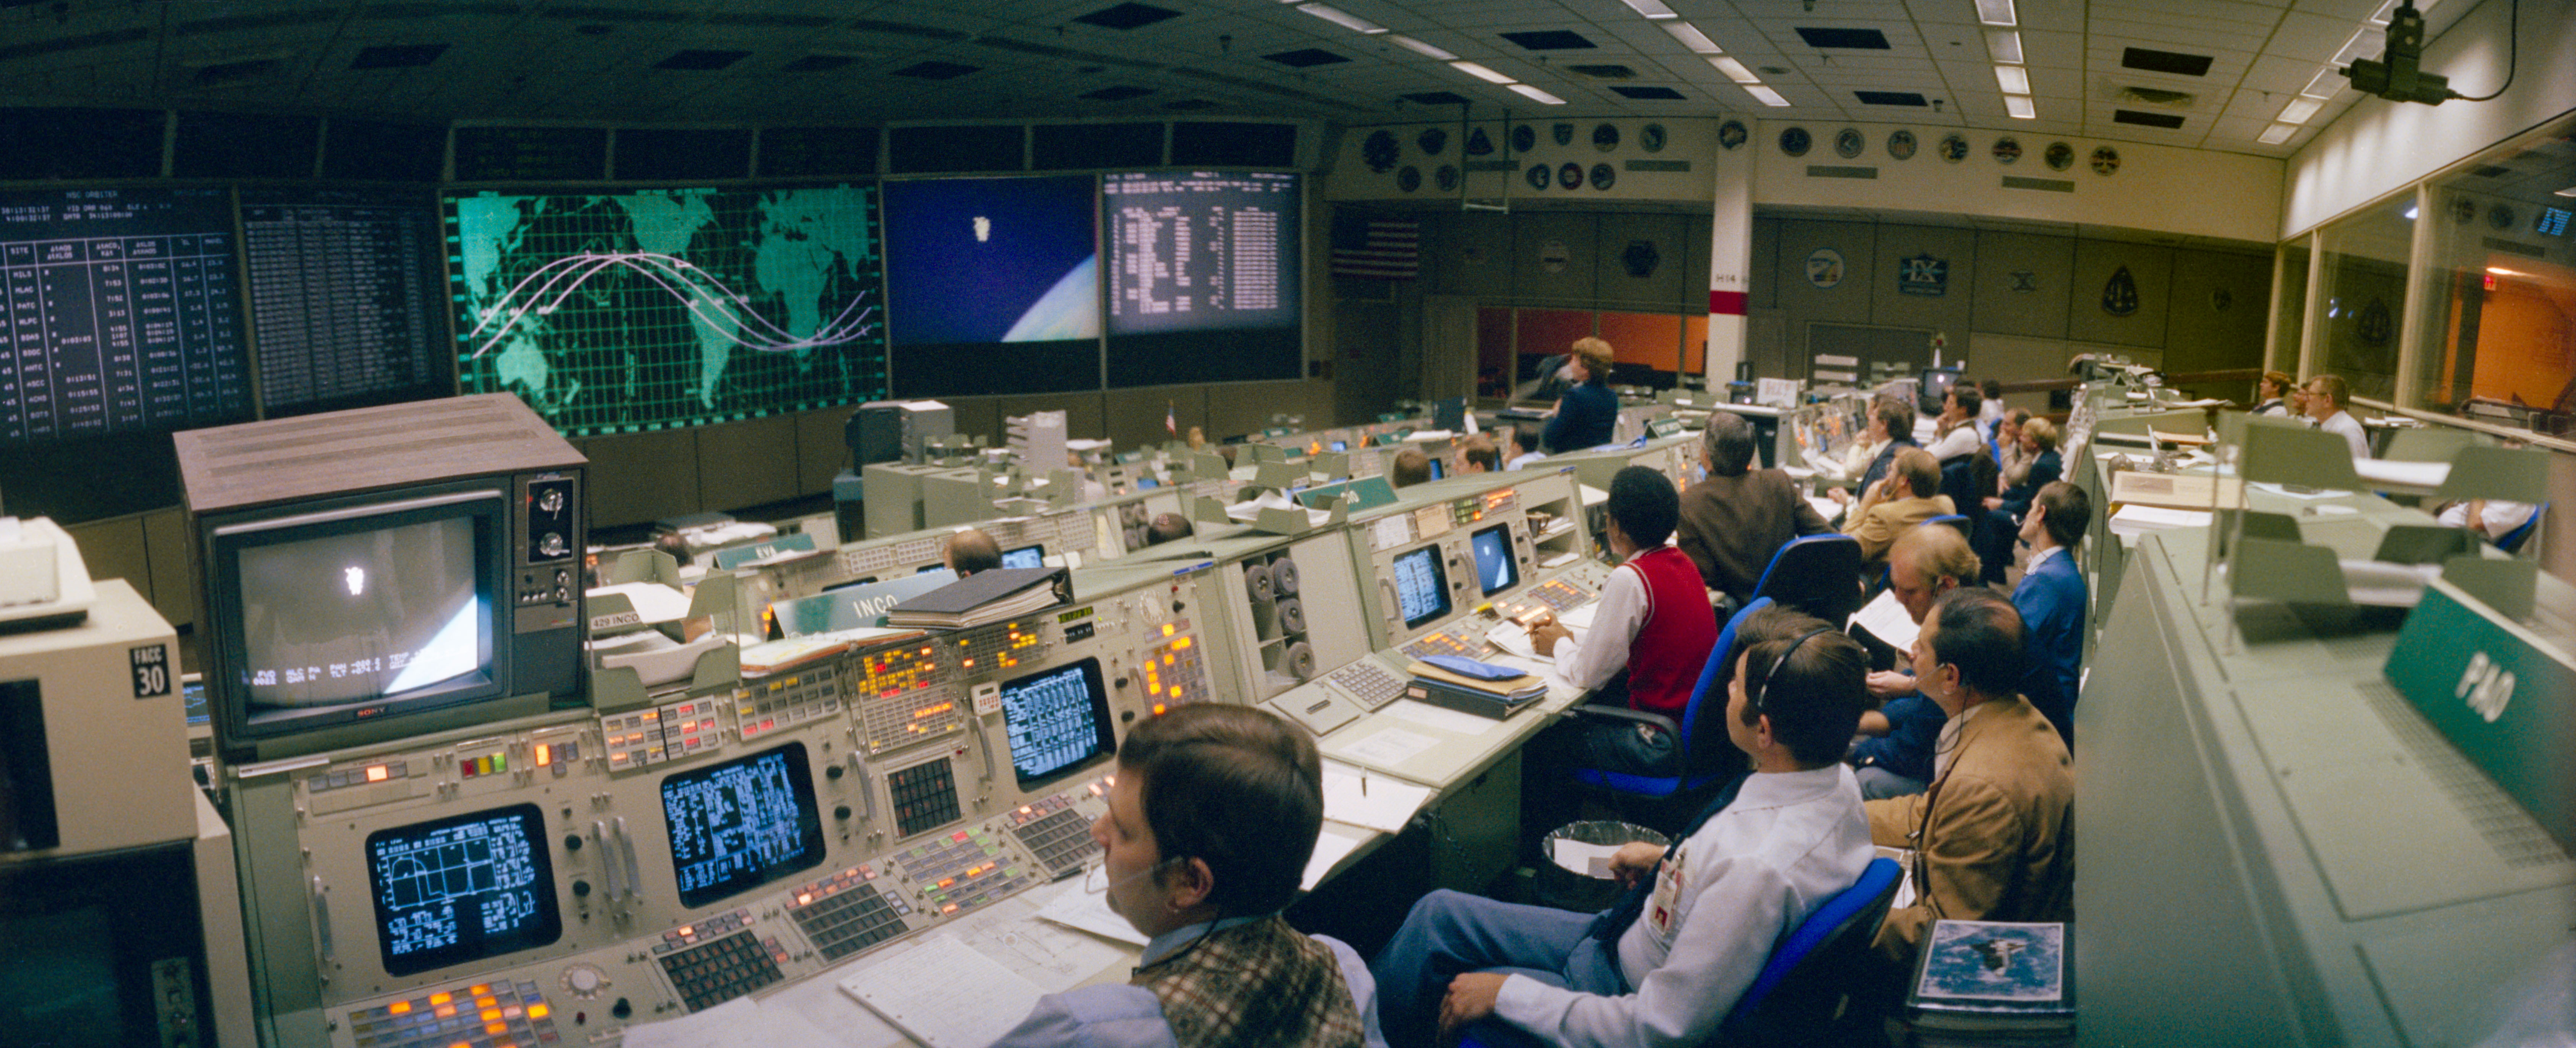 View in Mission Control at NASA’s Johnson Space Center in Houston during the first STS-41B spacewalk